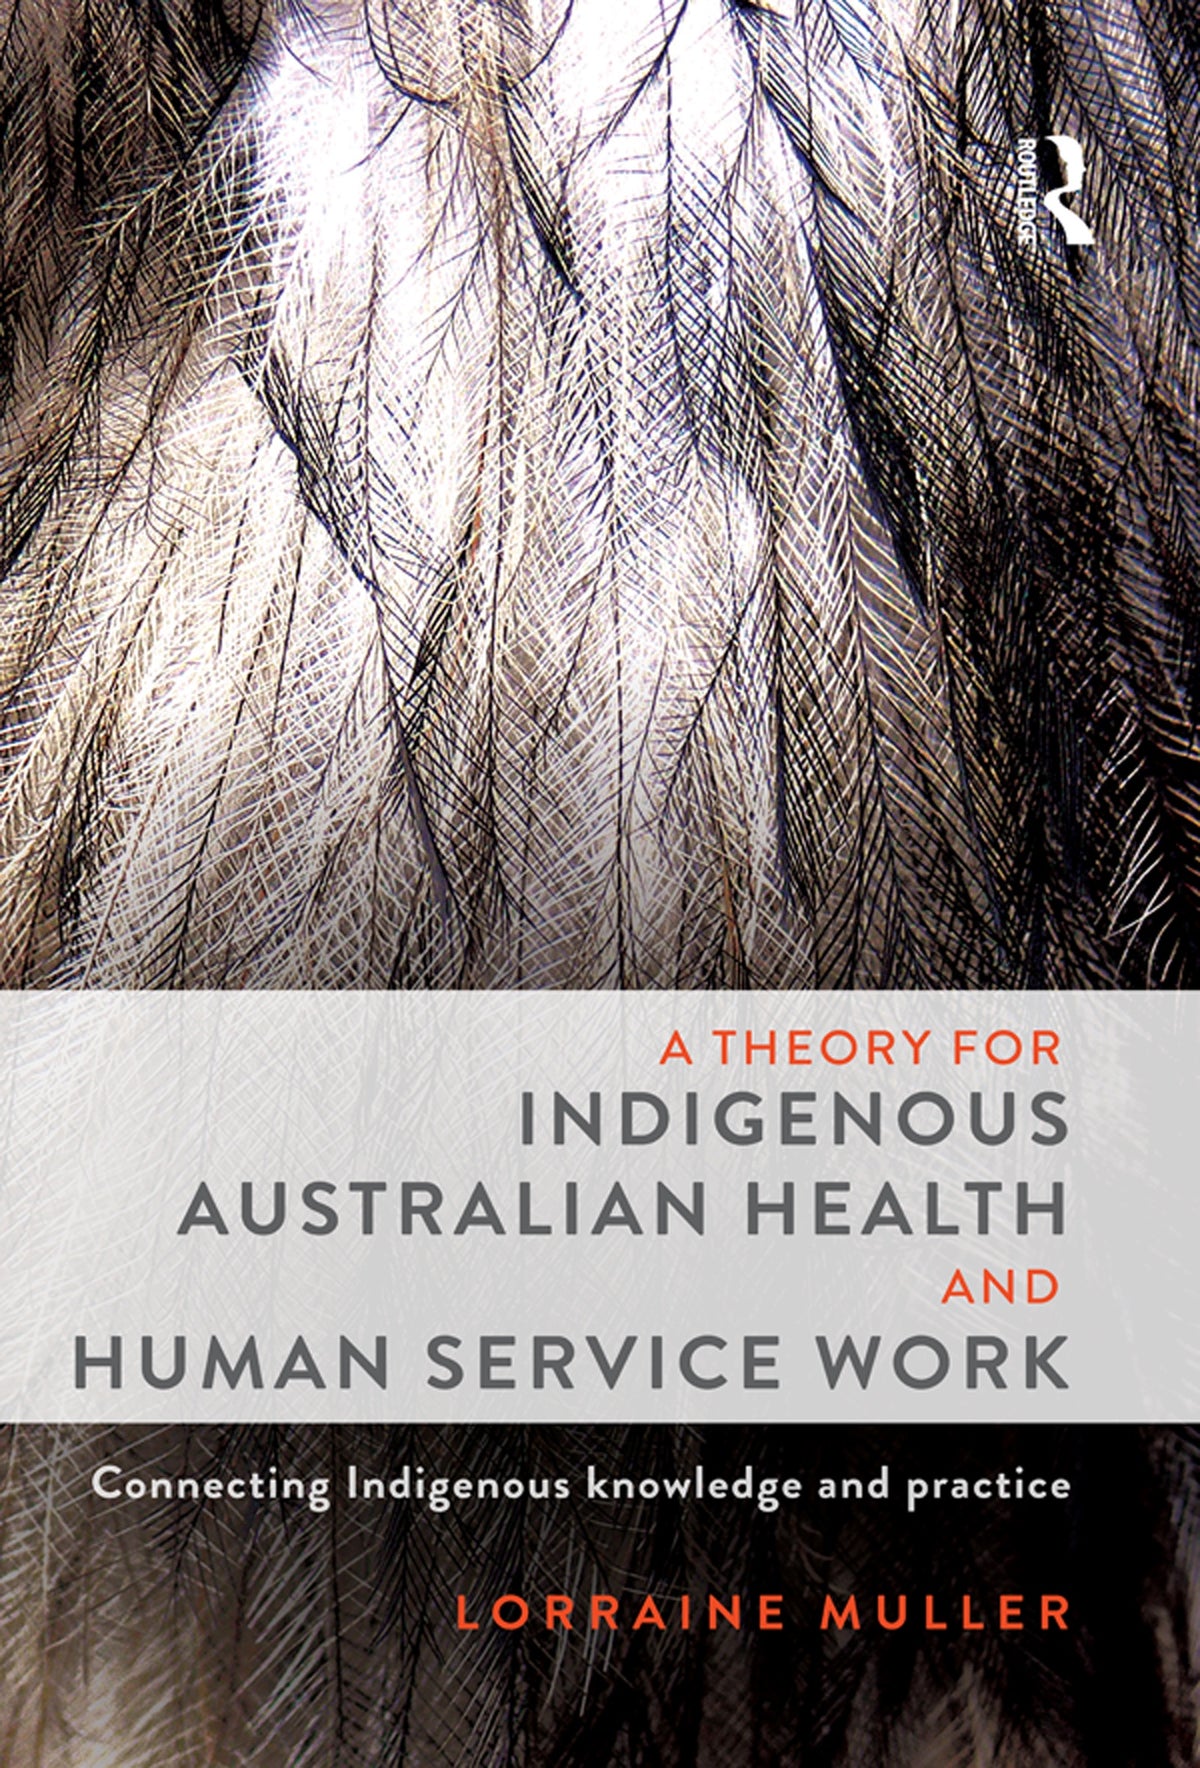 A THEORY FOR INDIGENOUS AUSTRALIAN HEALTH AND HUMAN SERVICE WORK